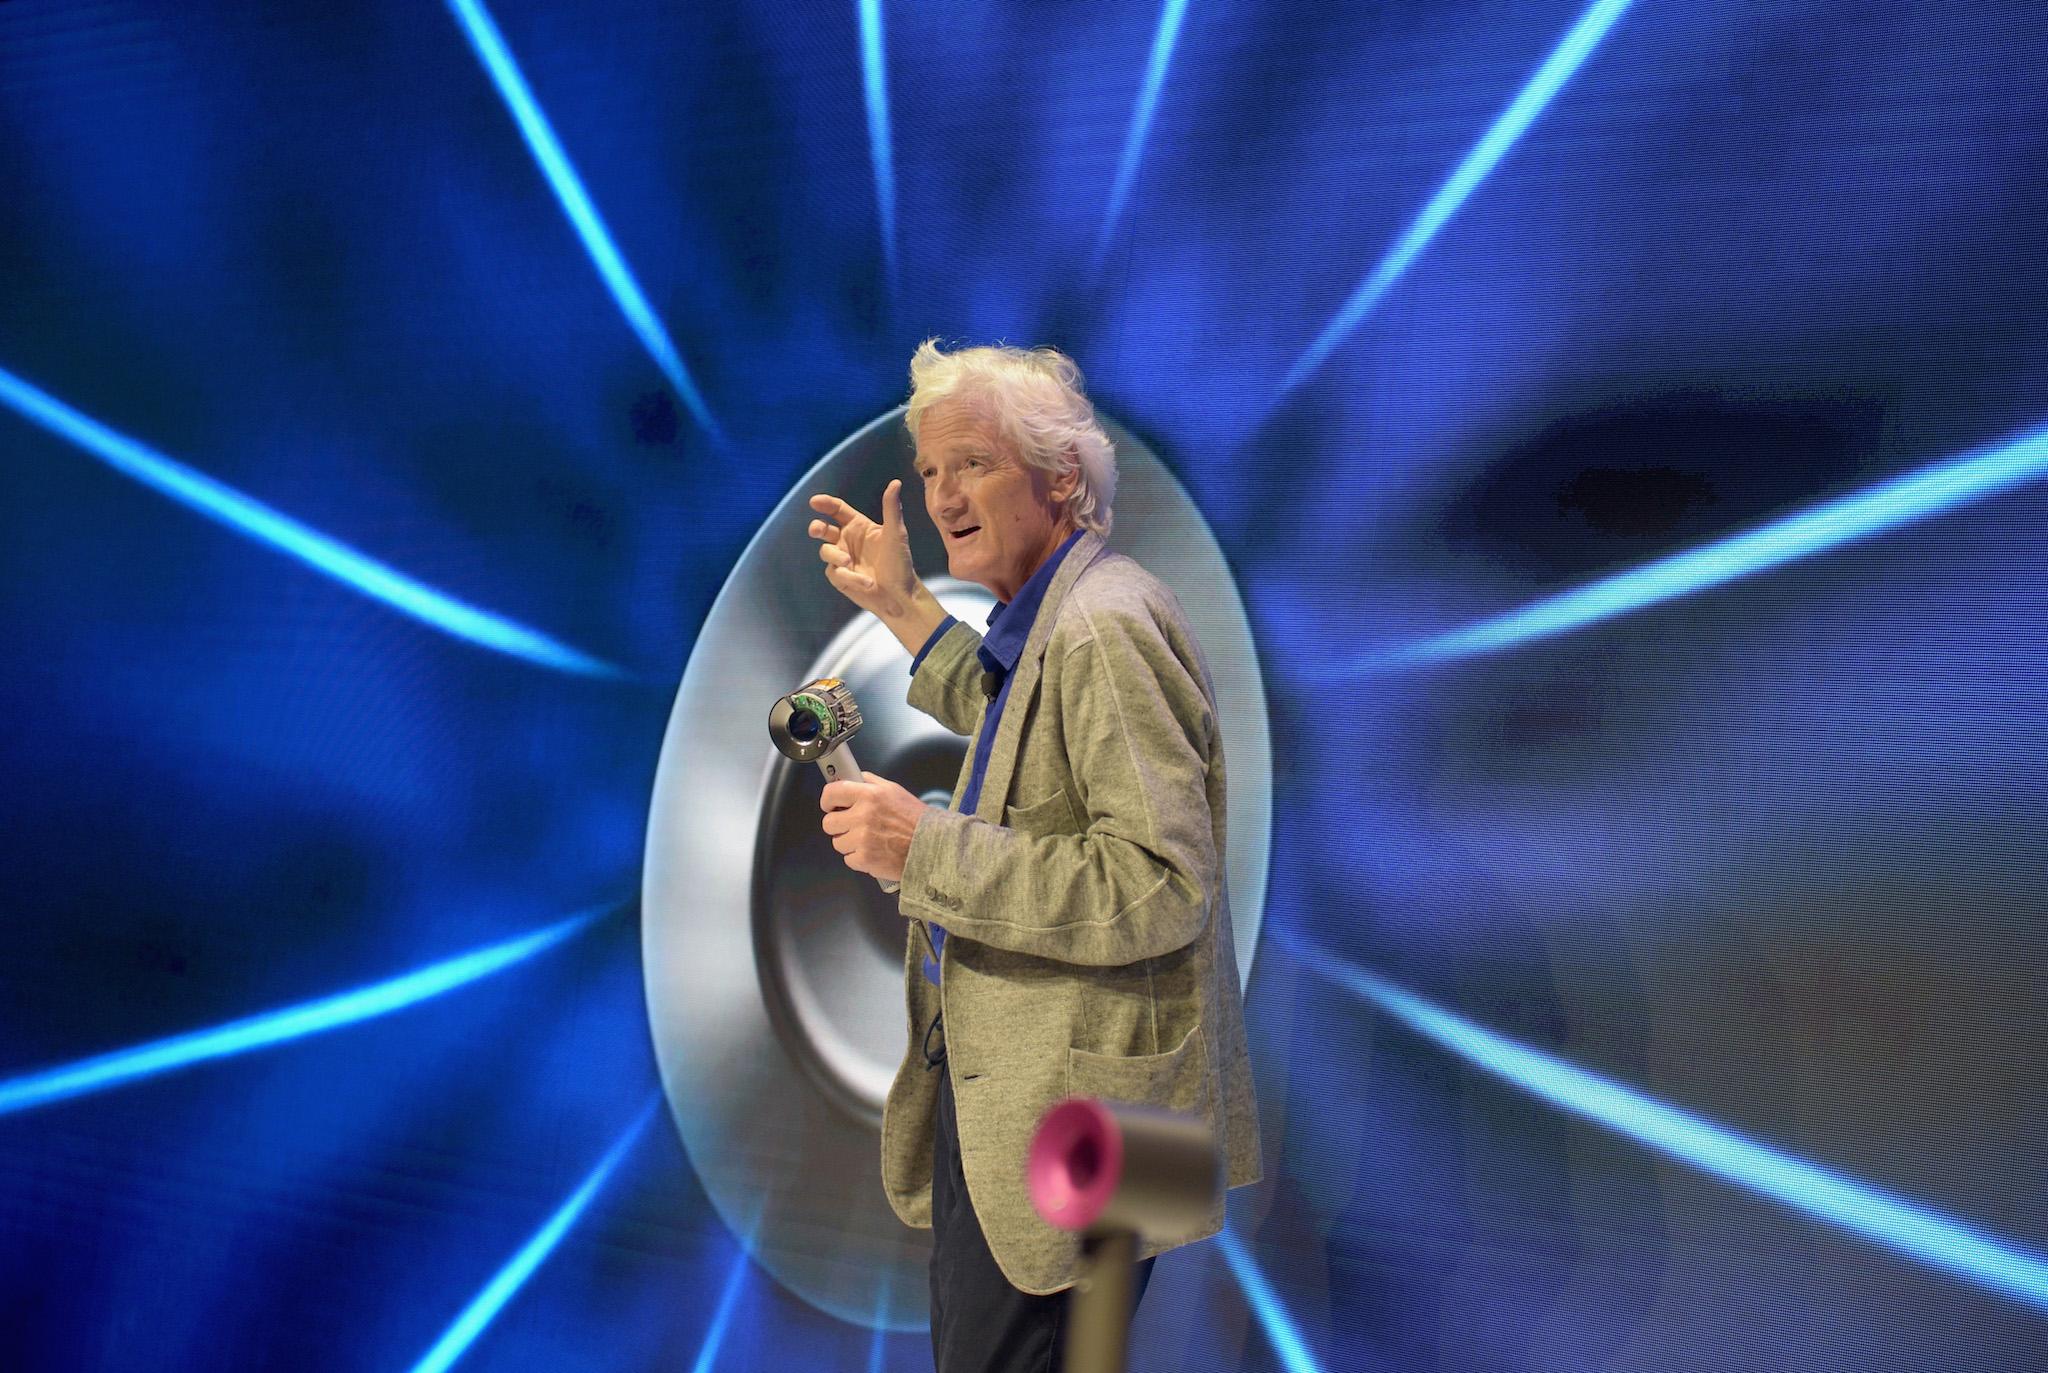 Sir James Dyson, the founder of Dyson, which is moving its corporate HQ from Wiltshire to Singapore